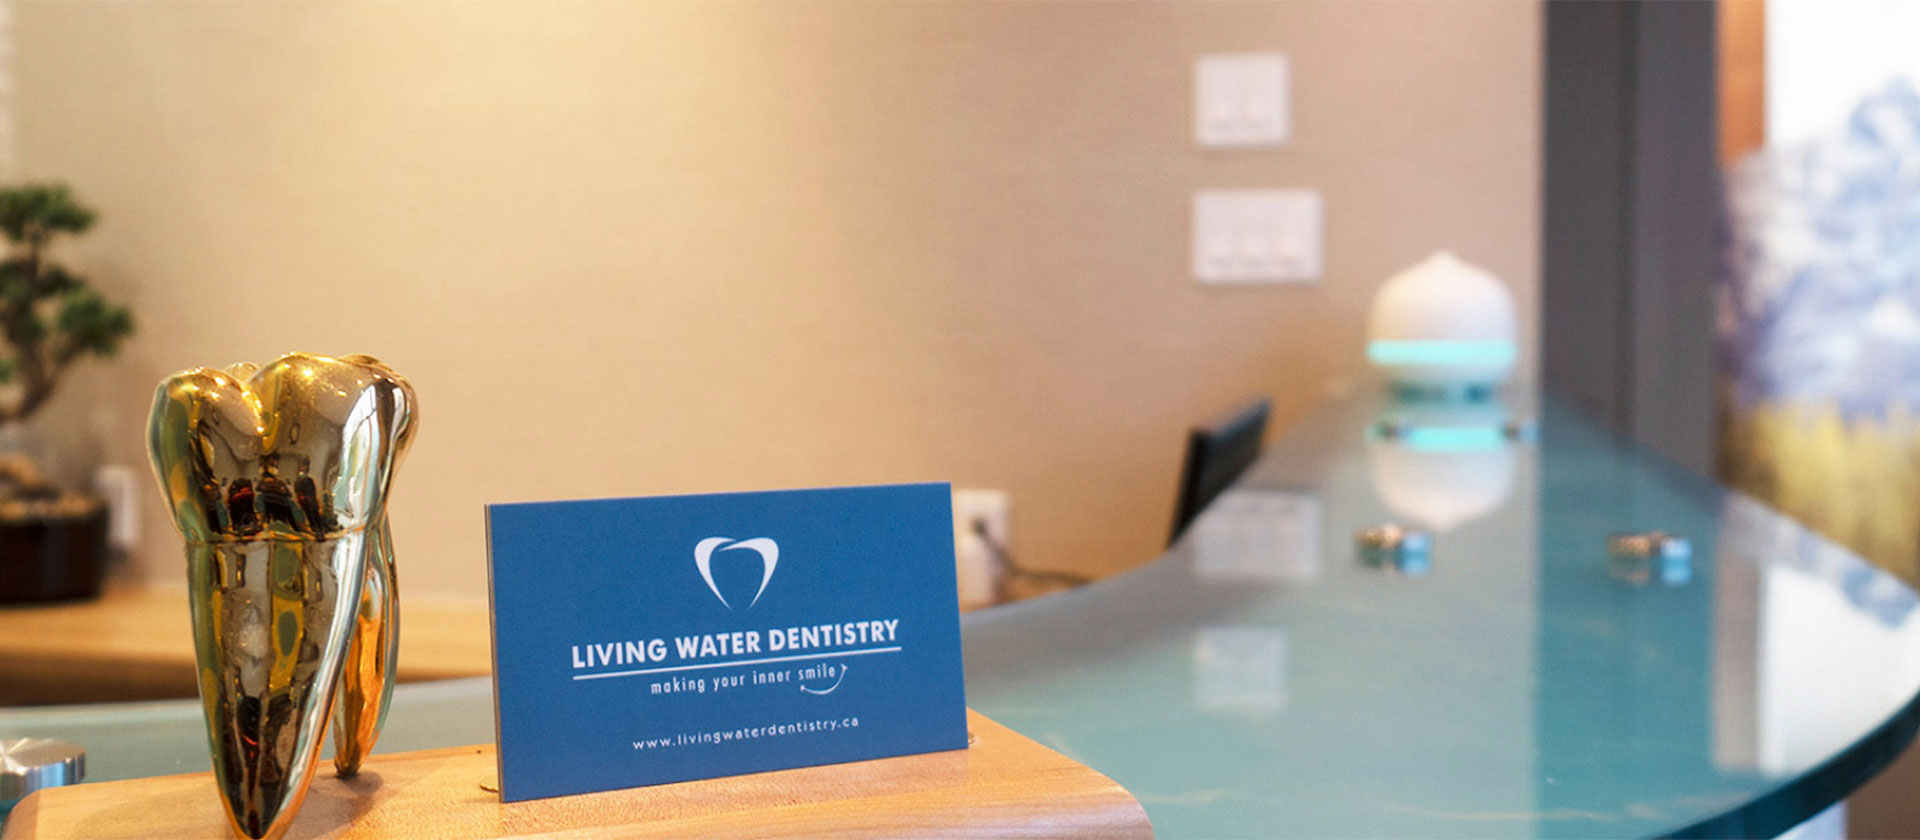 Living Water Dentistry, Dental Clinic In Surrey, BC